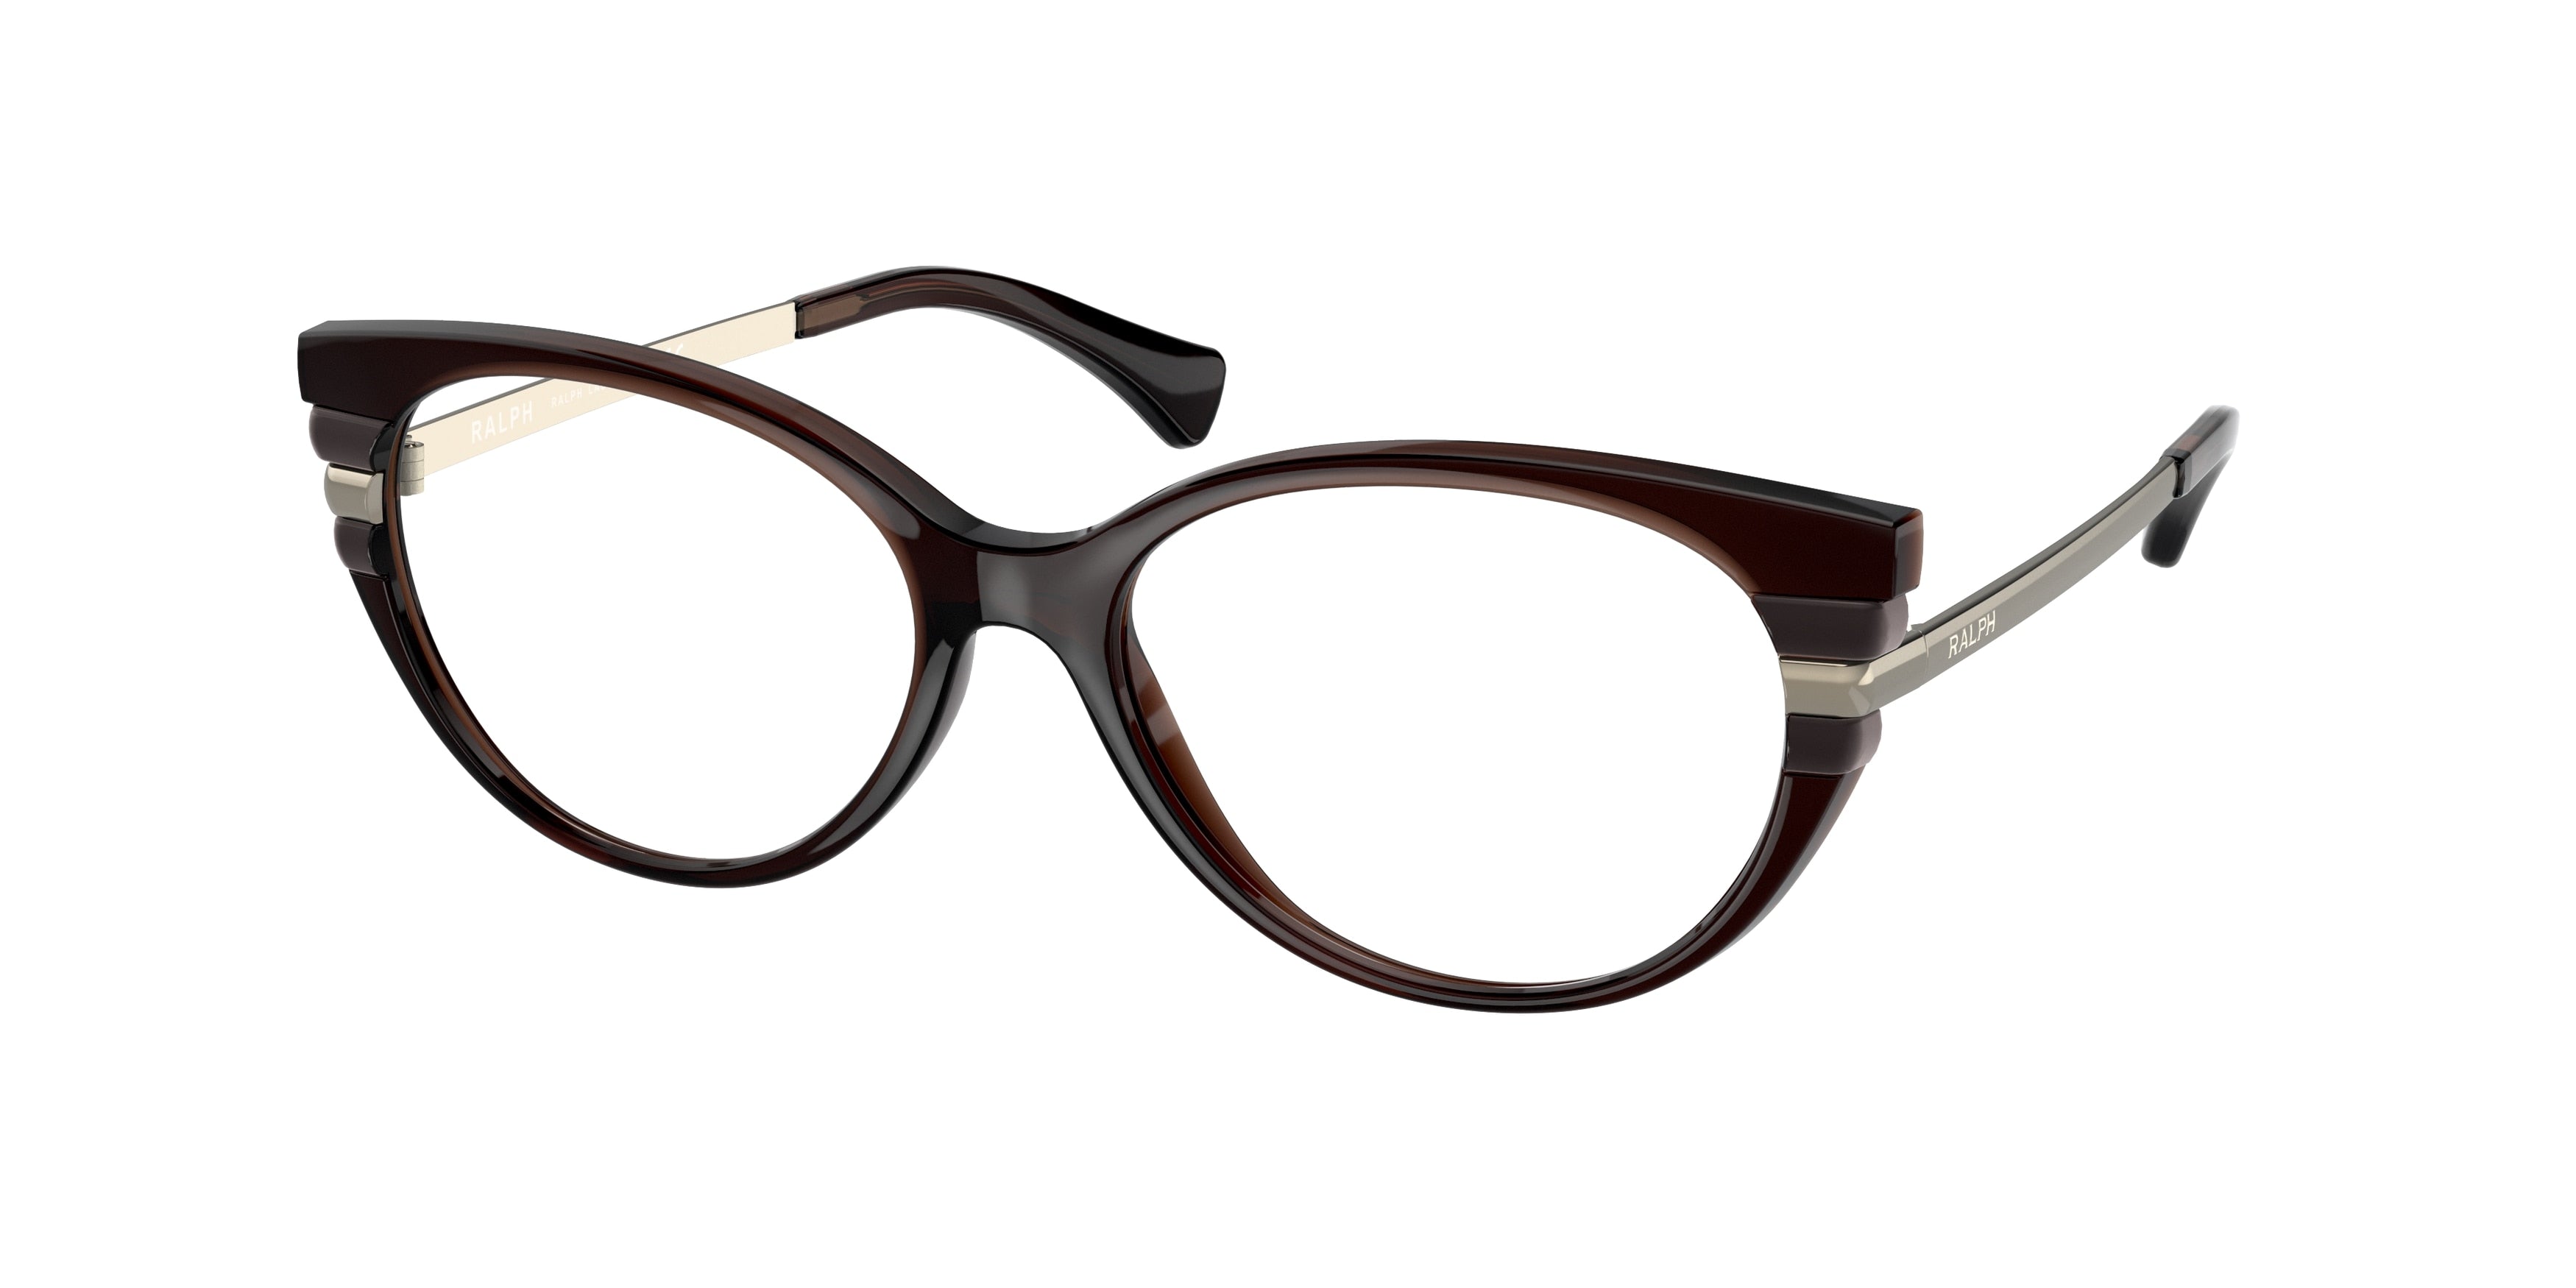 Ralph RA7127 Butterfly Eyeglasses  5943-Opal Brown With Brown Details 54-140-16 - Color Map Brown